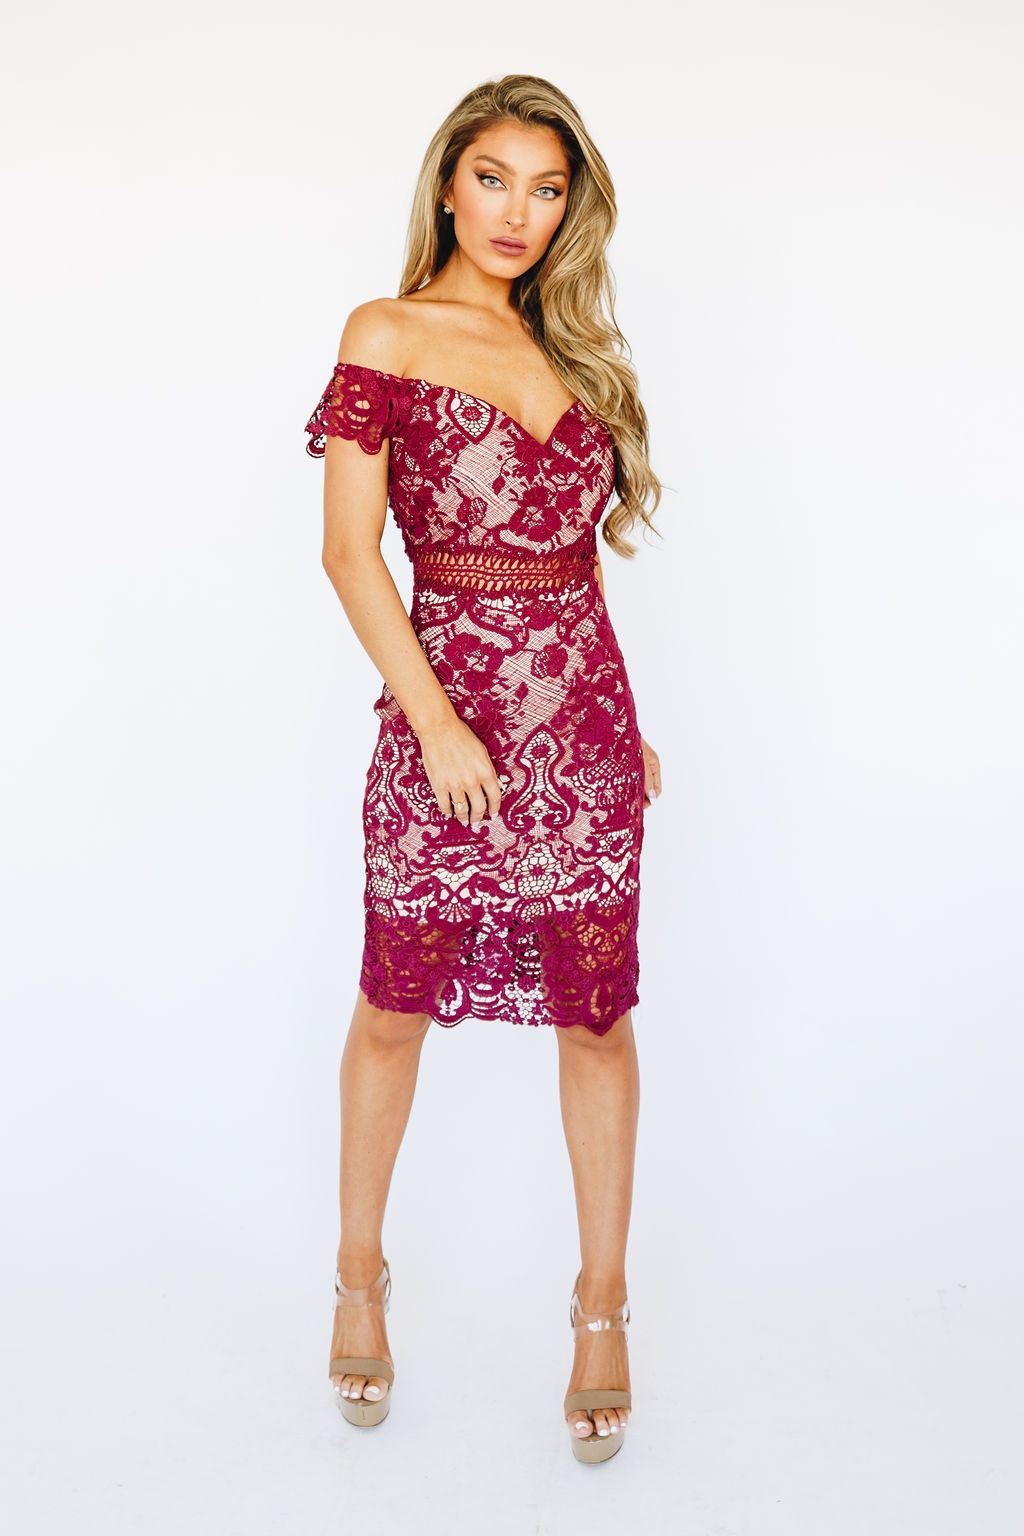 Style D16609-3 Soieblu Size 4 Off The Shoulder Lace Burgundy Red Cocktail Dress on Queenly